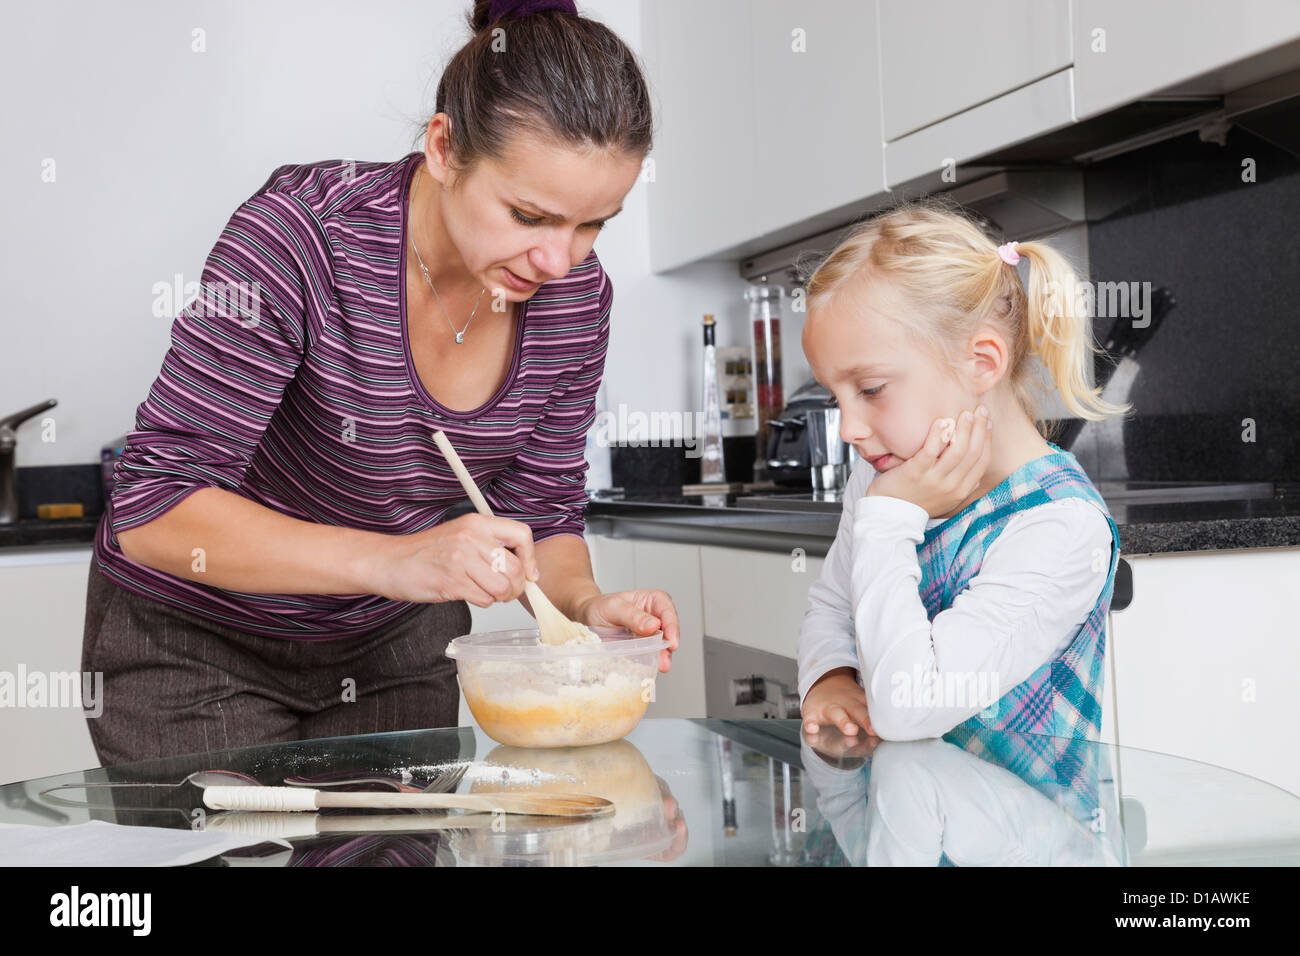 Girl cooking in kitchen Banque D'Images